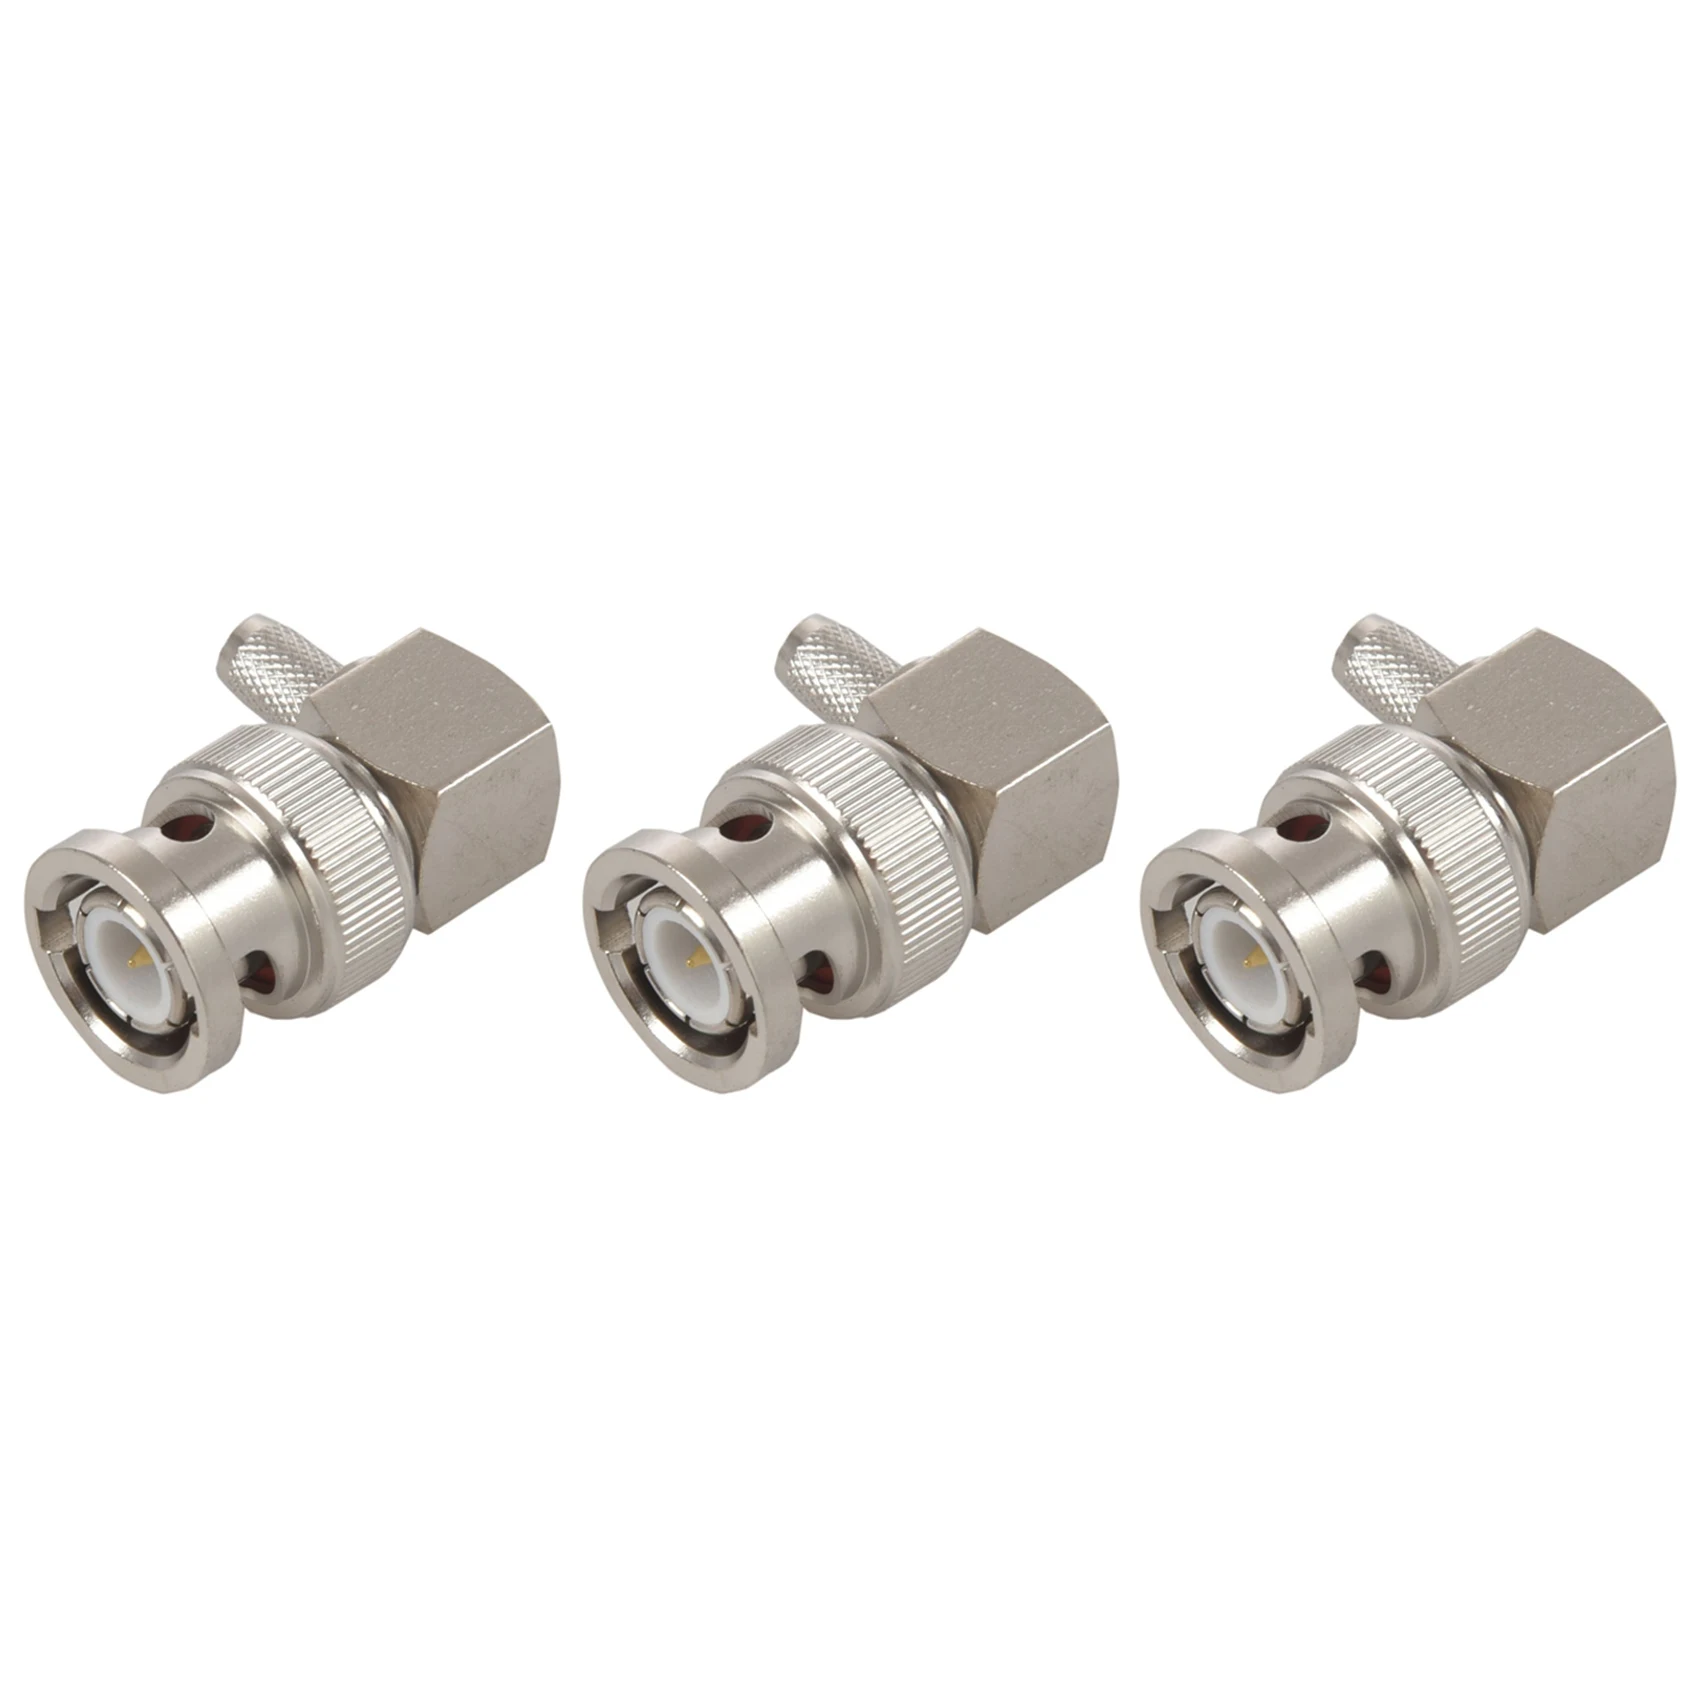 

3X BNC Male Plug Right Angle Crimp for RG58 RG400 RFC195 RF Coax Adapter Connector,Silver